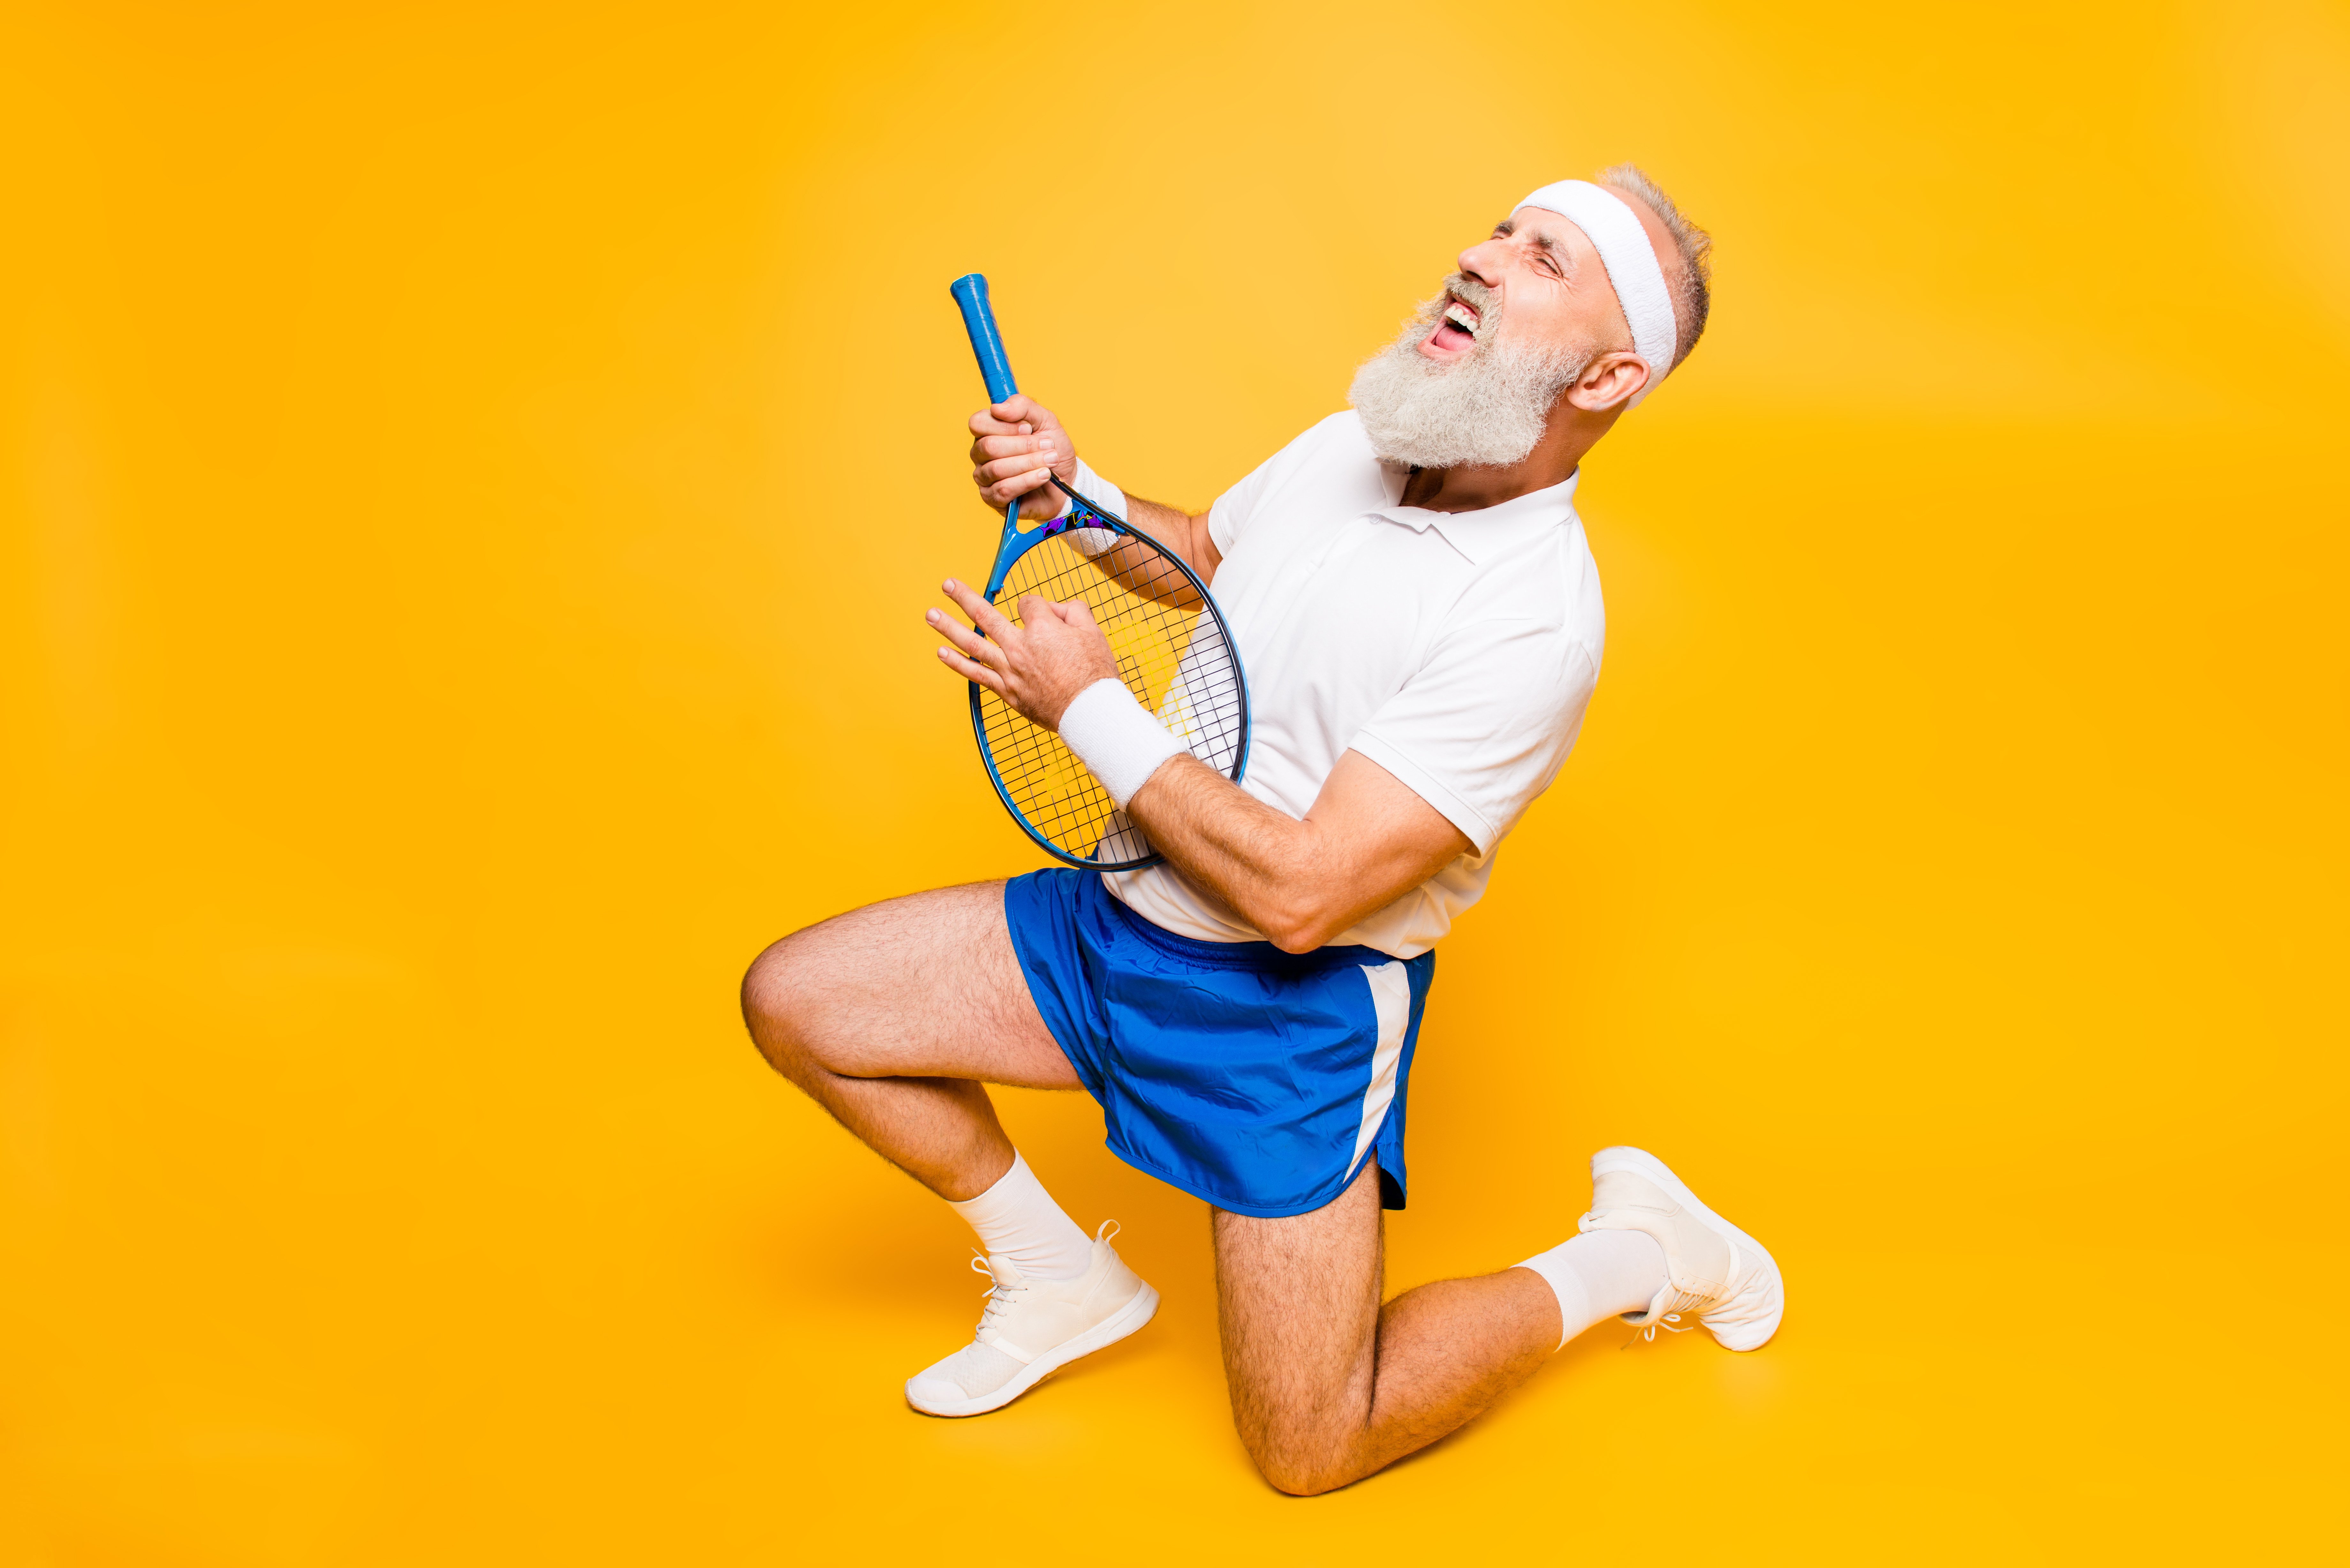 Playing tennis isn't the only cause of tennis elbow!